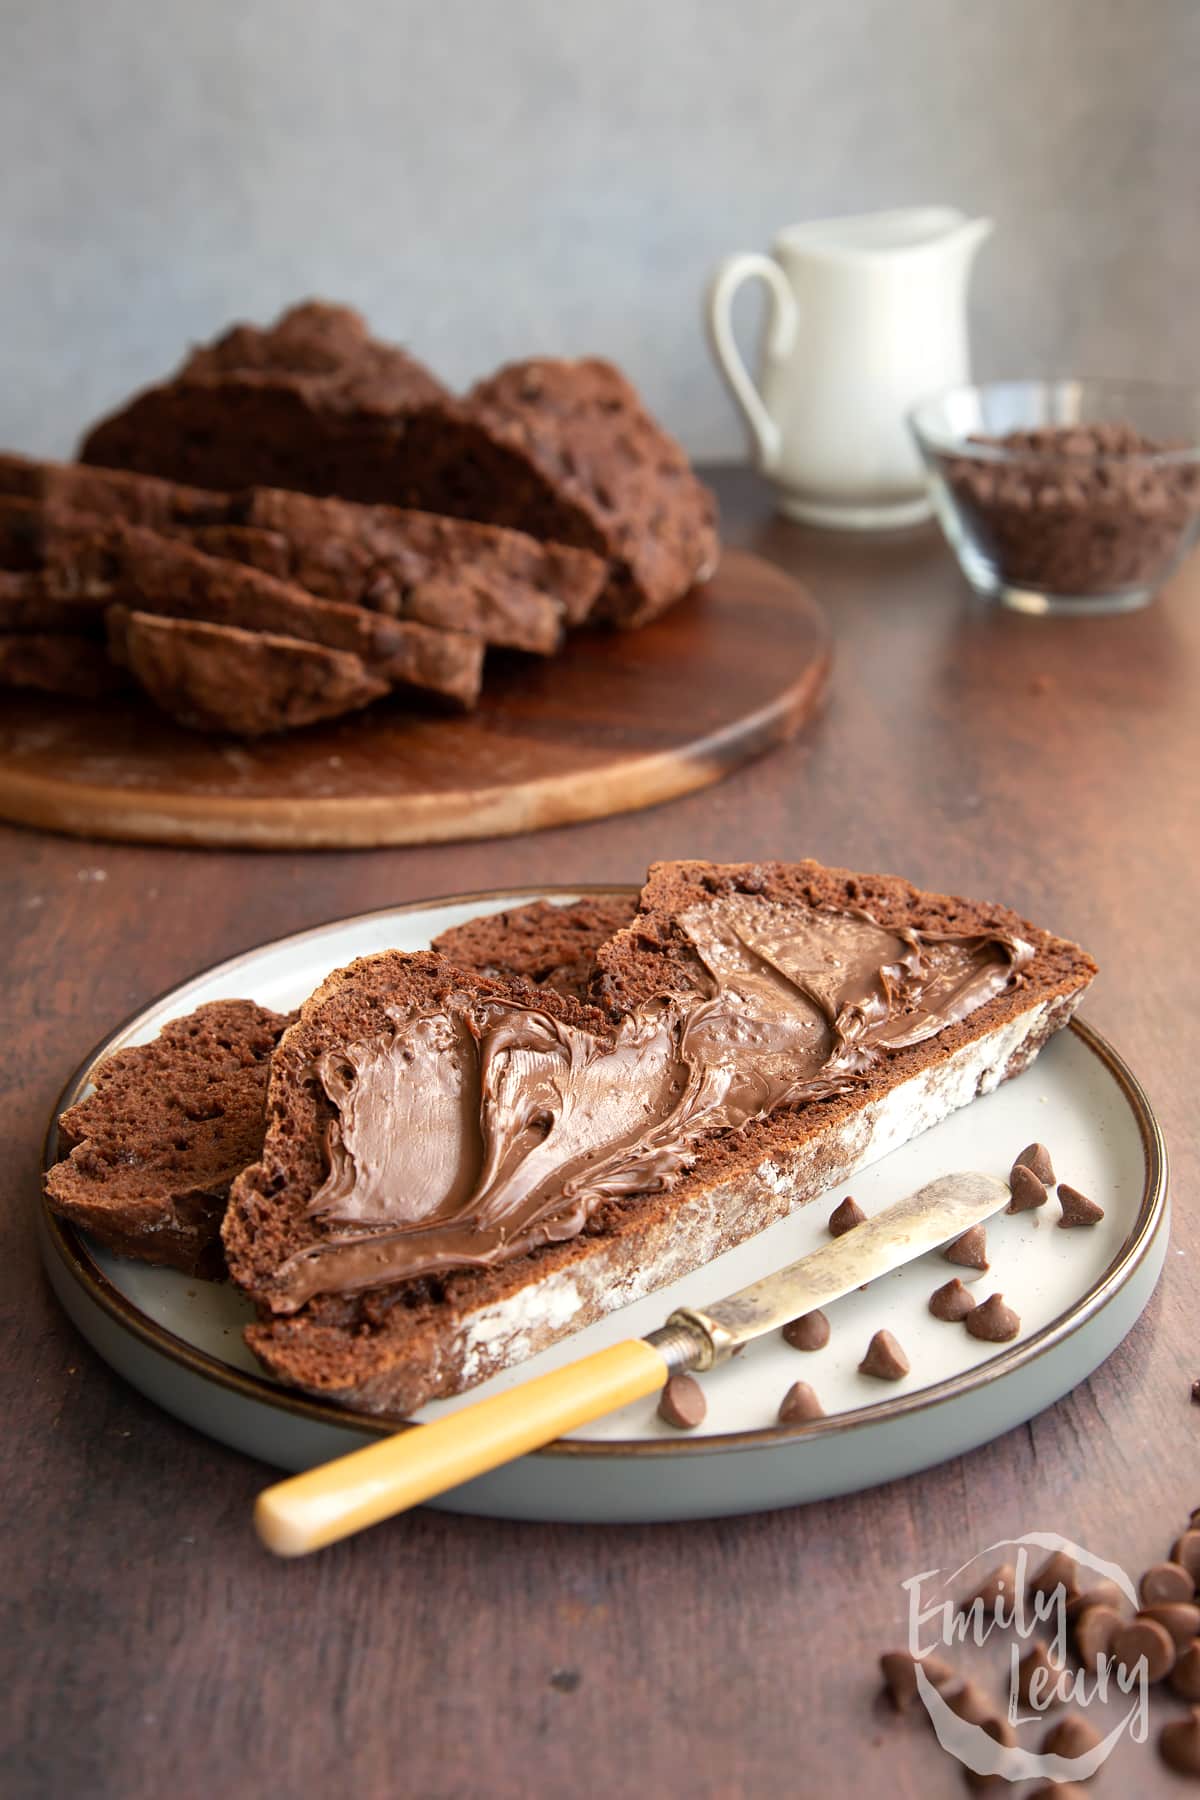 Close up shot of the sliced chocolate soda bread served on a decorative plate and topped with chocolate spread.